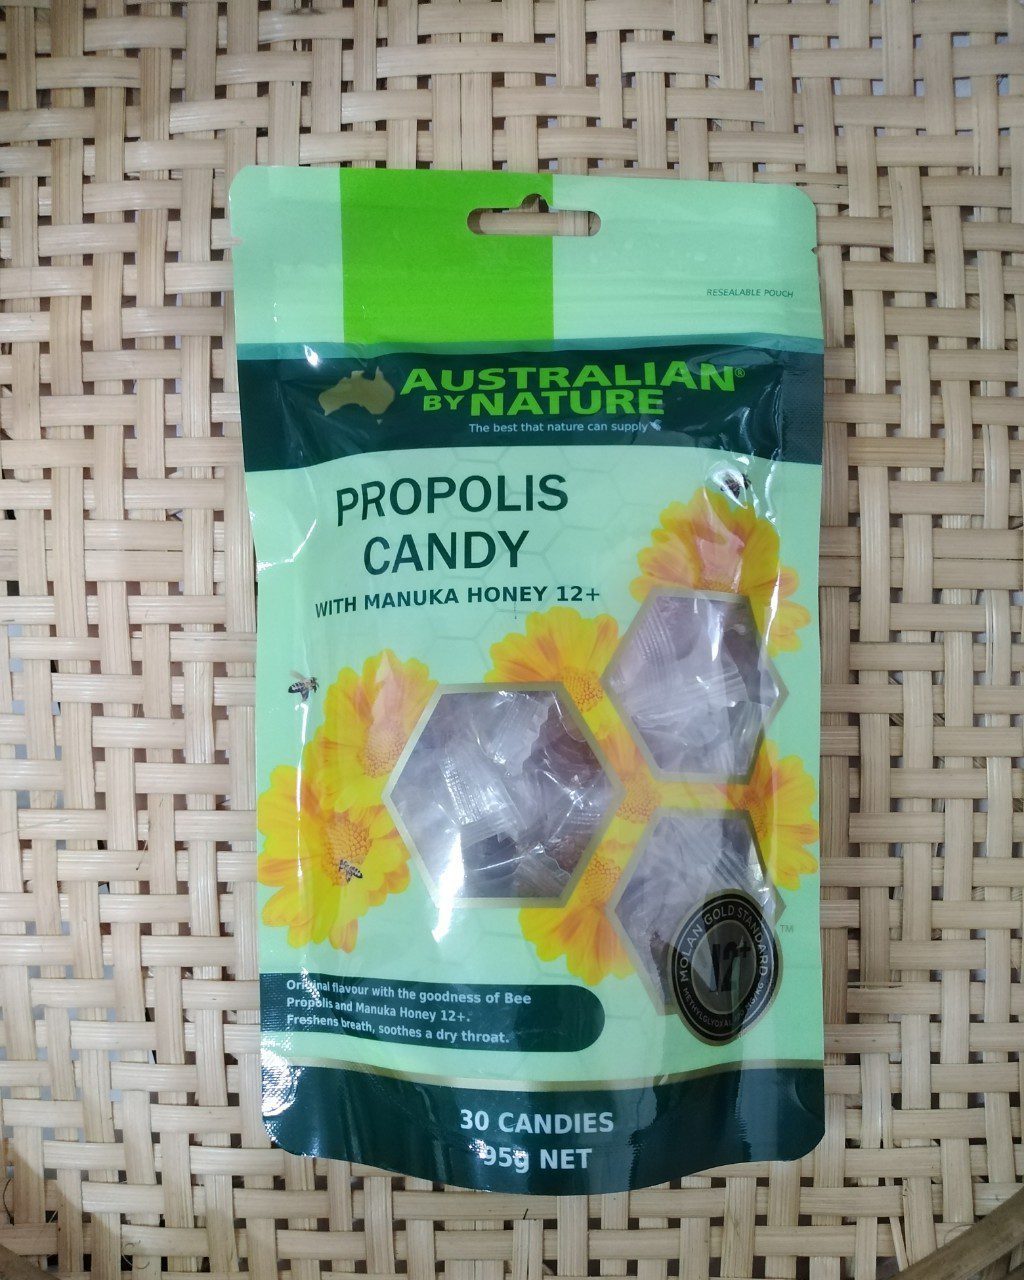 Propolis Candy with Manuka Honey 12+ Australian by Nature 95G/30Candies